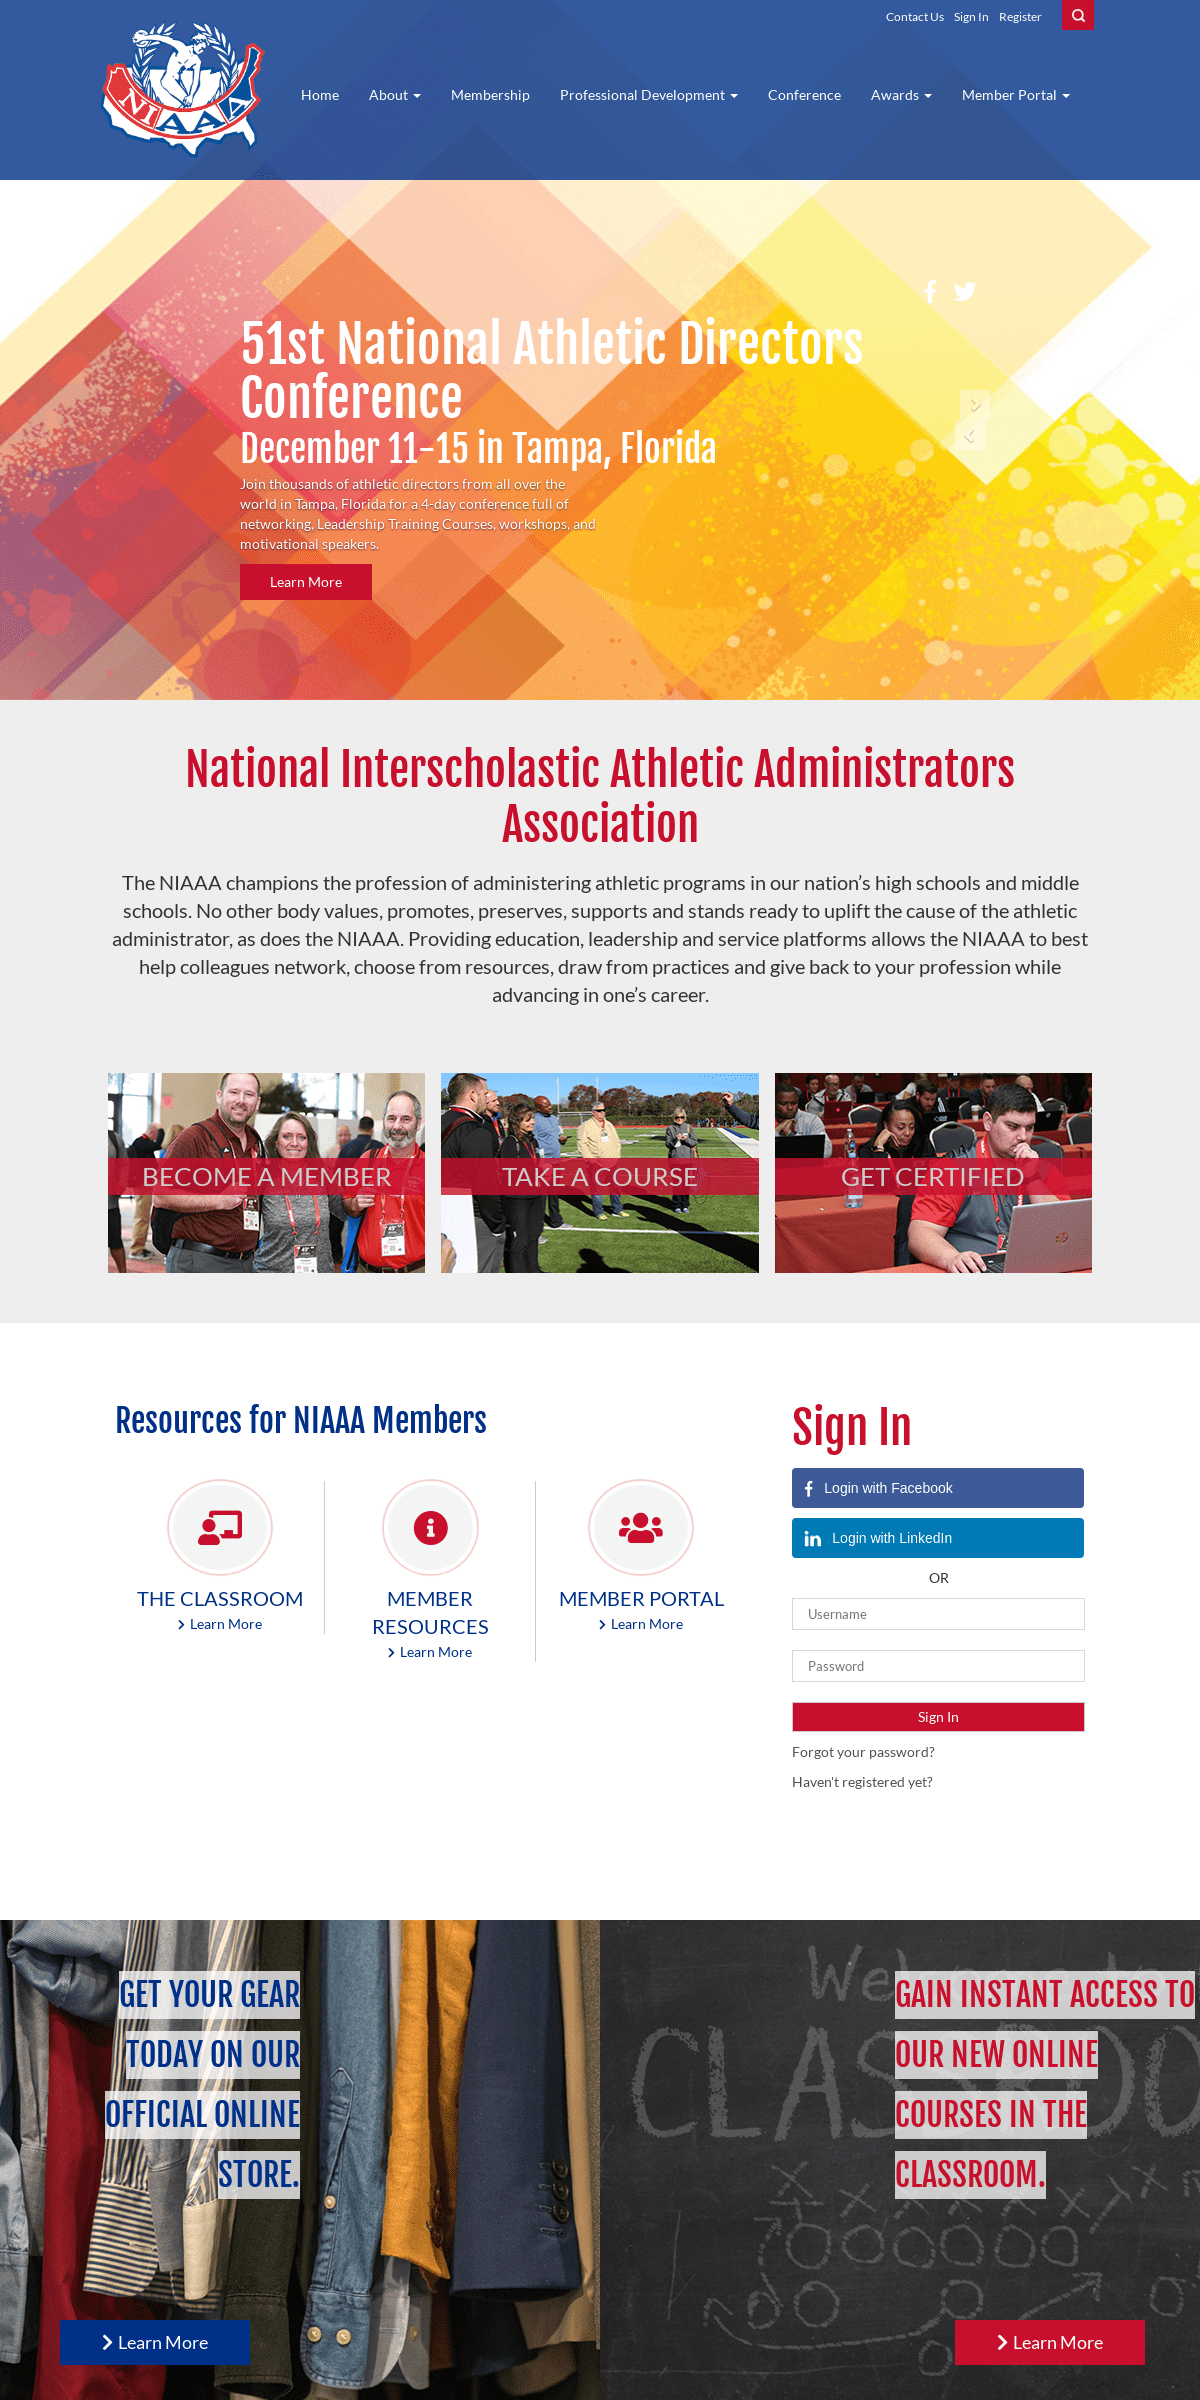 A complete backup of niaaa.org